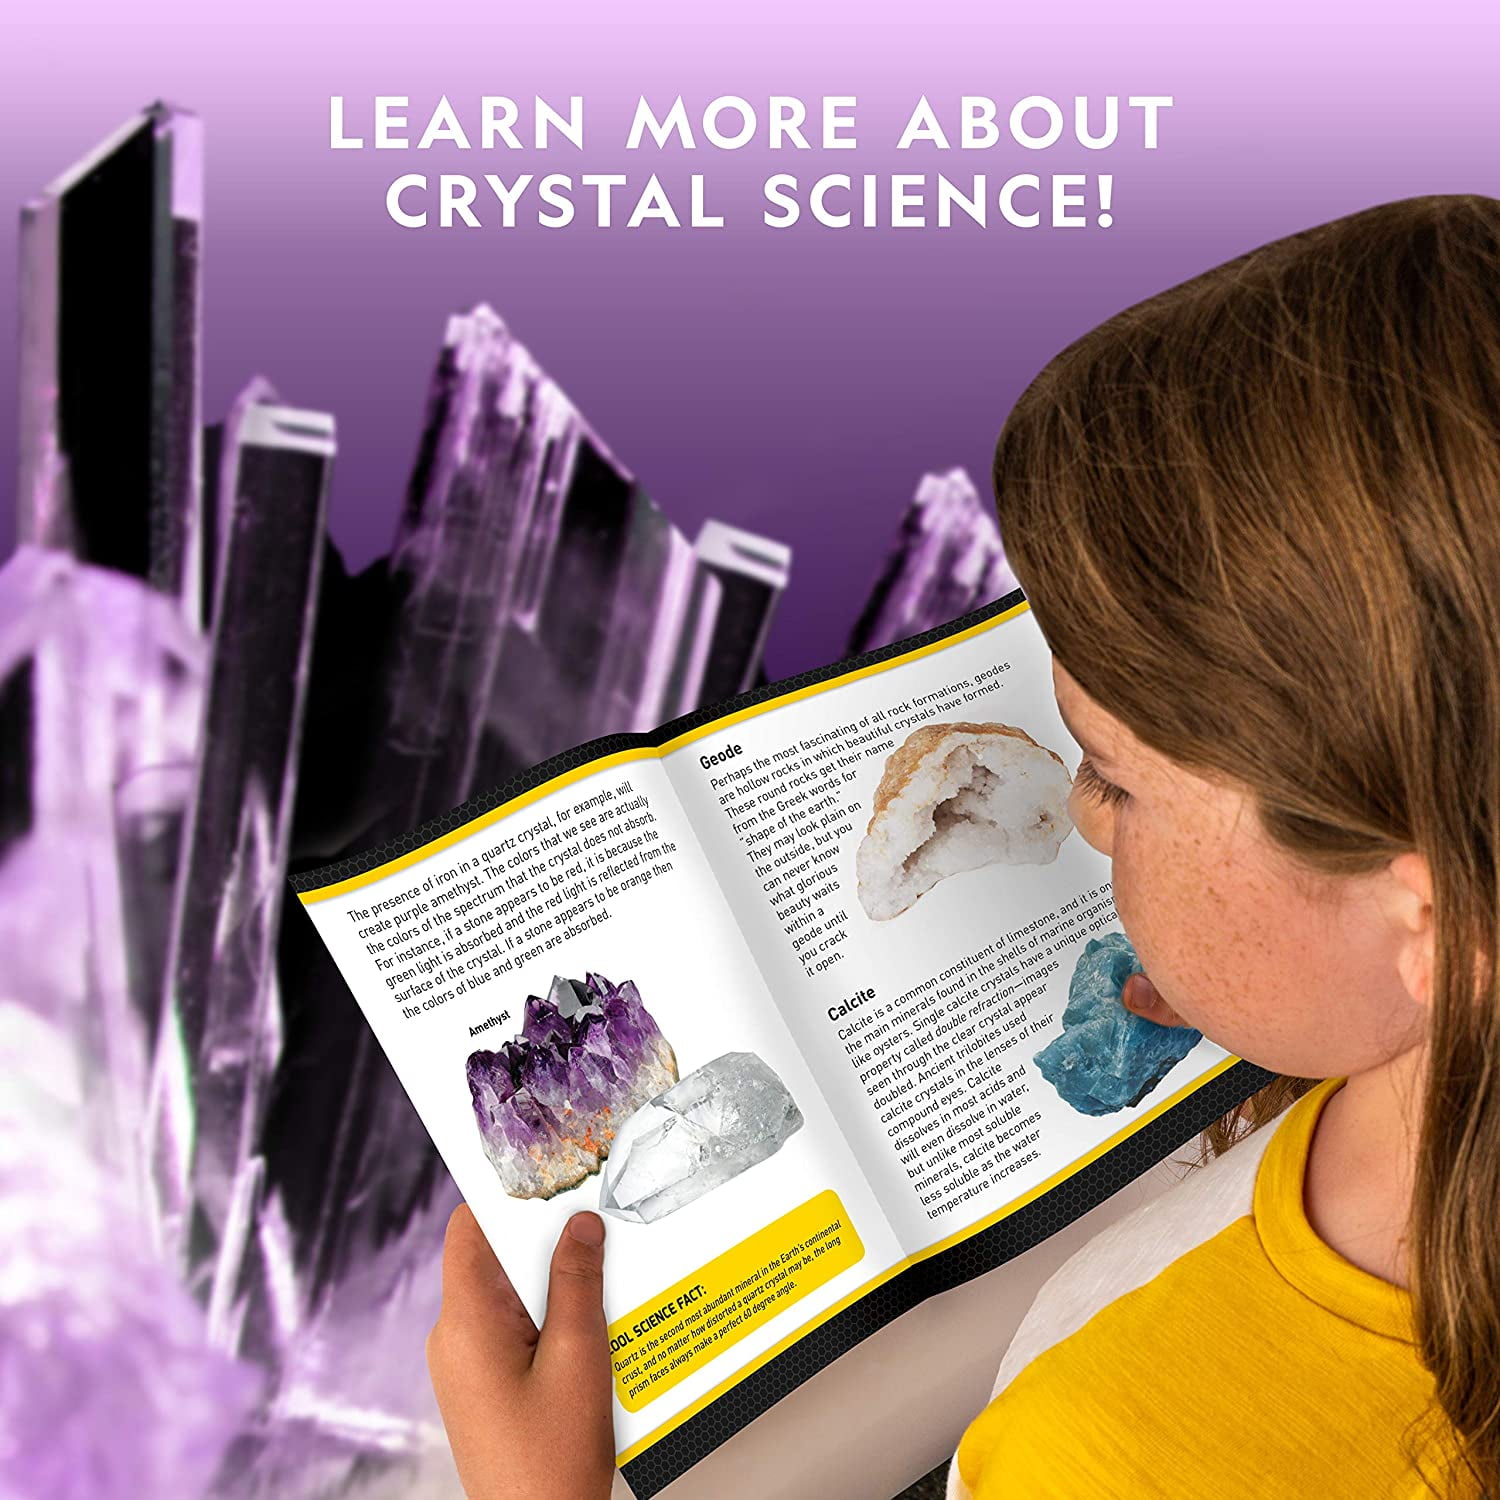 Grow 6 Vibrant Crystals NATIONAL GEOGRAPHIC Mega Crystal Growing Lab